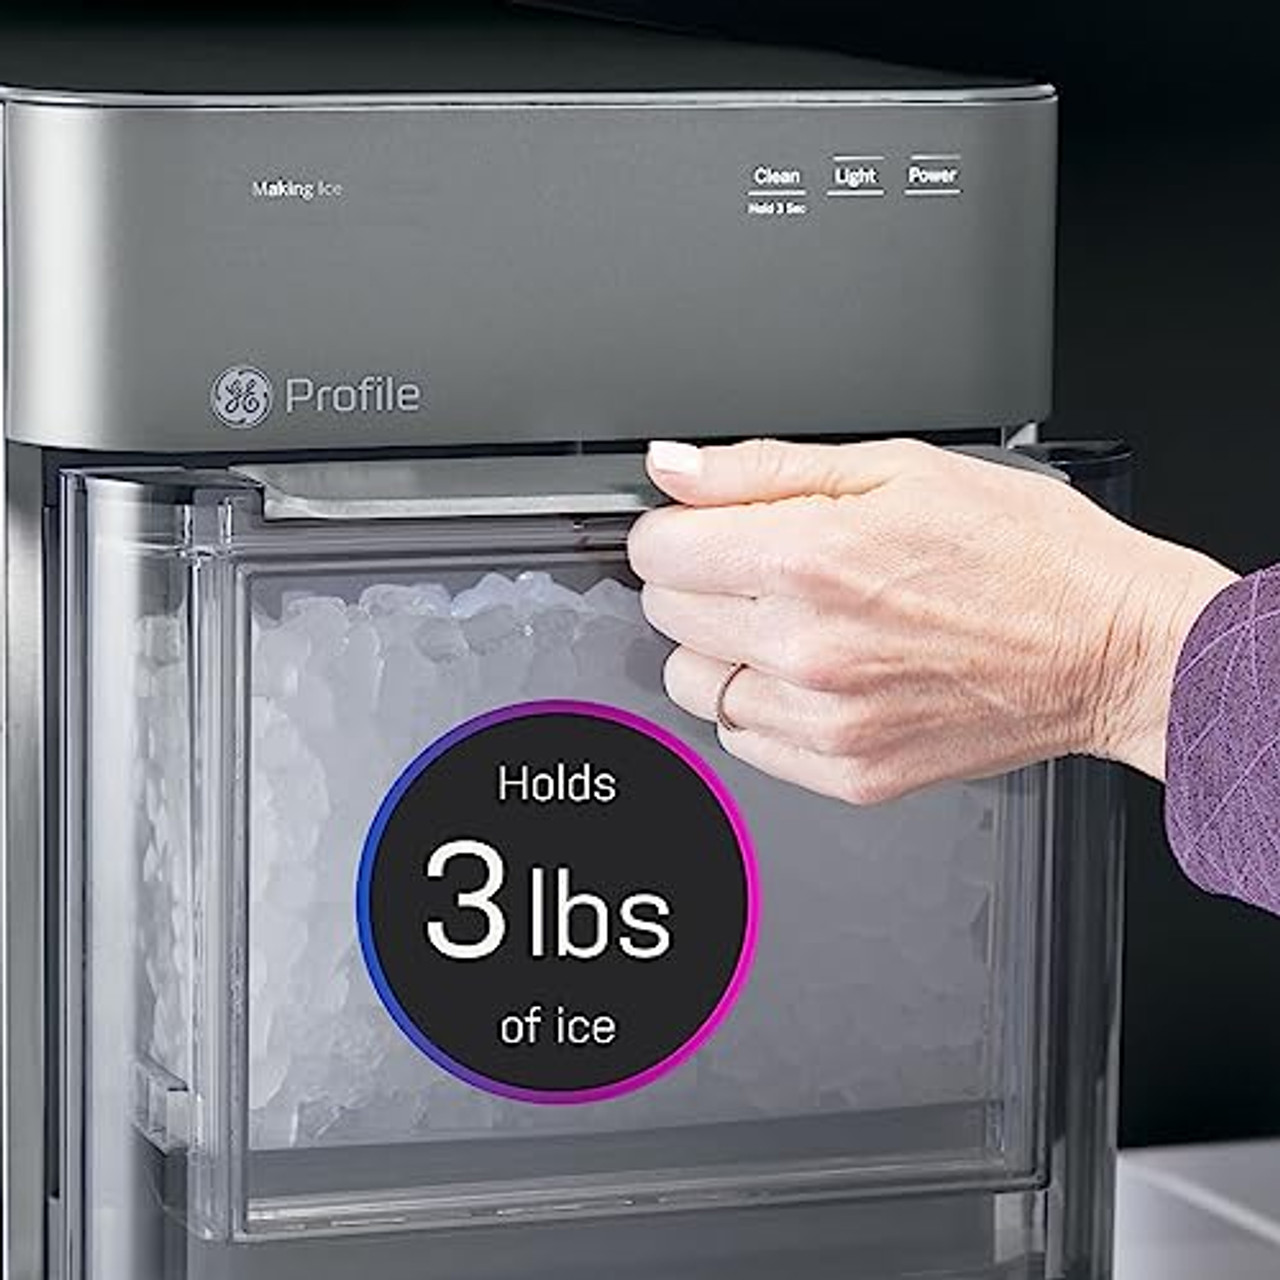  GE Profile Opal 2.0, Countertop Nugget Ice Maker, Ice Machine  with WiFi Connectivity, Smart Home Kitchen Essentials